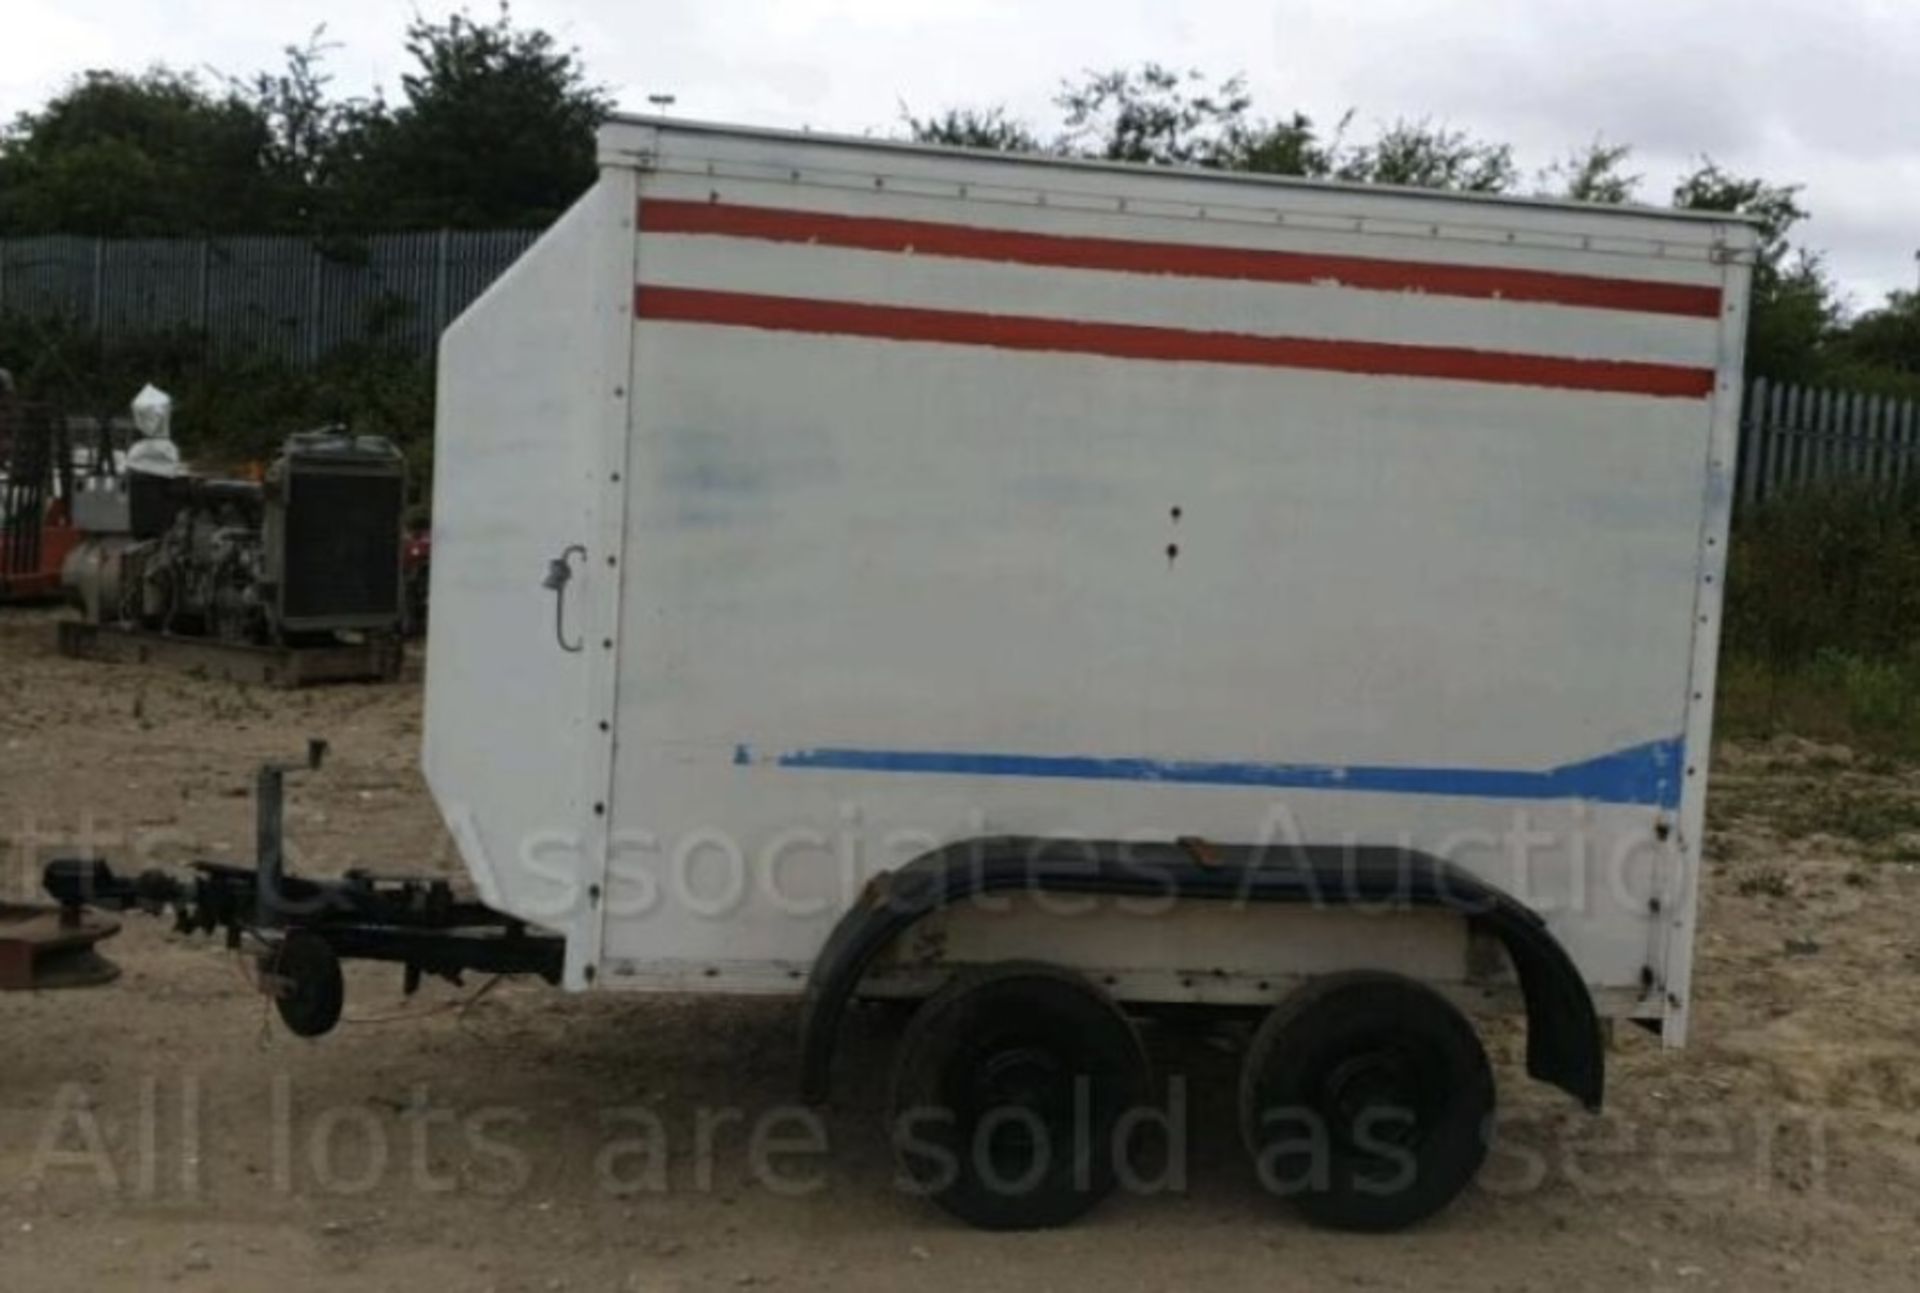 INDESPENSION TWIN AXLE BOX TRAILER TOW VAN *LOCATION NORTH YORKSHIRE*